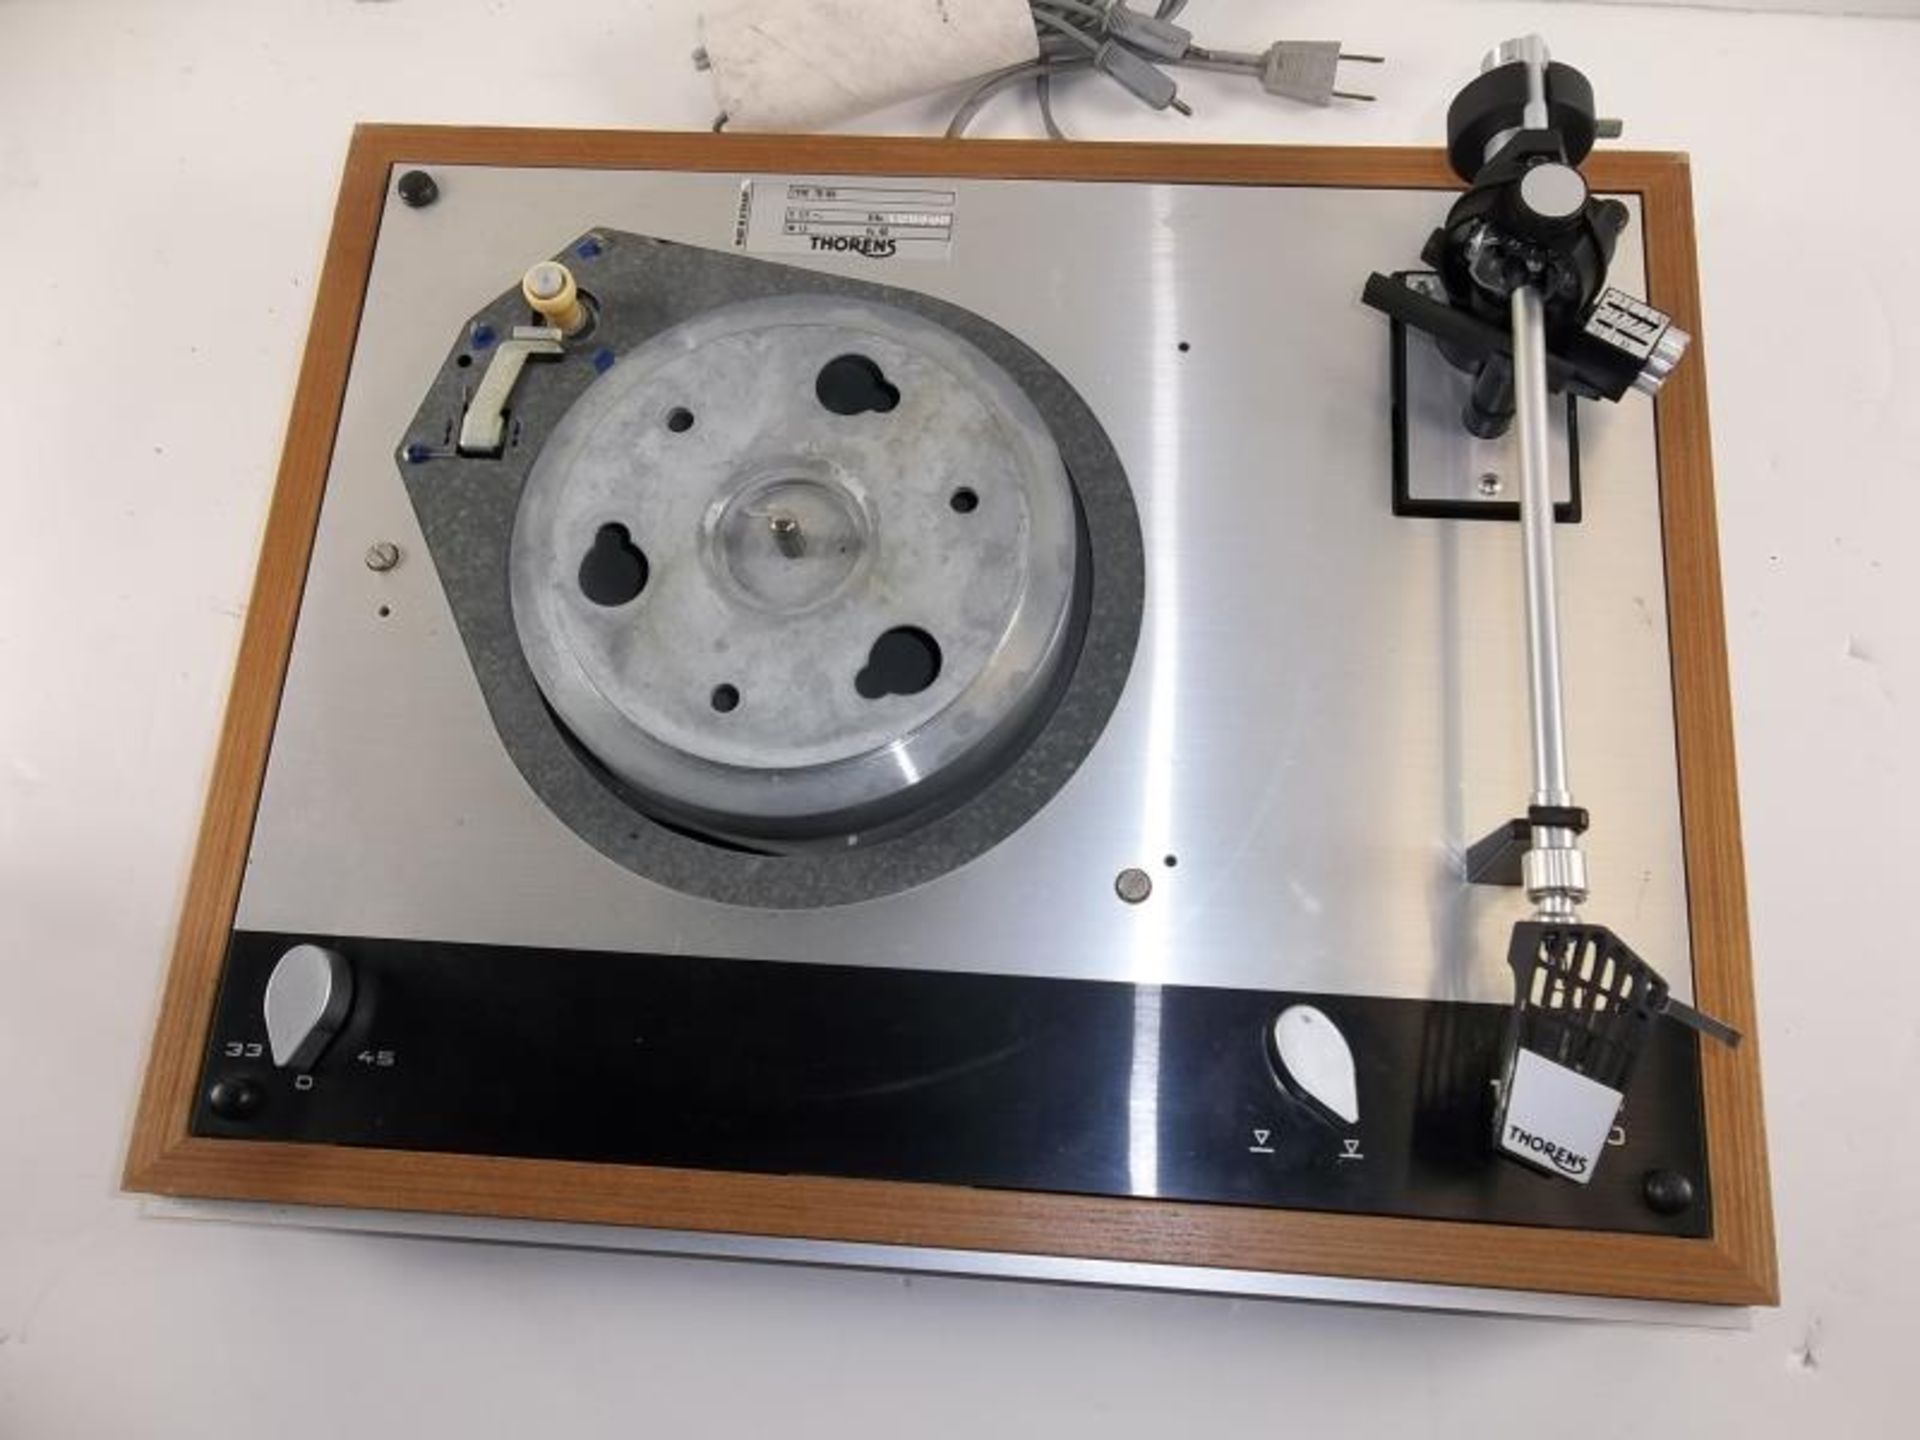 Thorens TD-160 with a Thorens arm,no turn table or mat, head is broken off, dust cover with split - Image 2 of 3